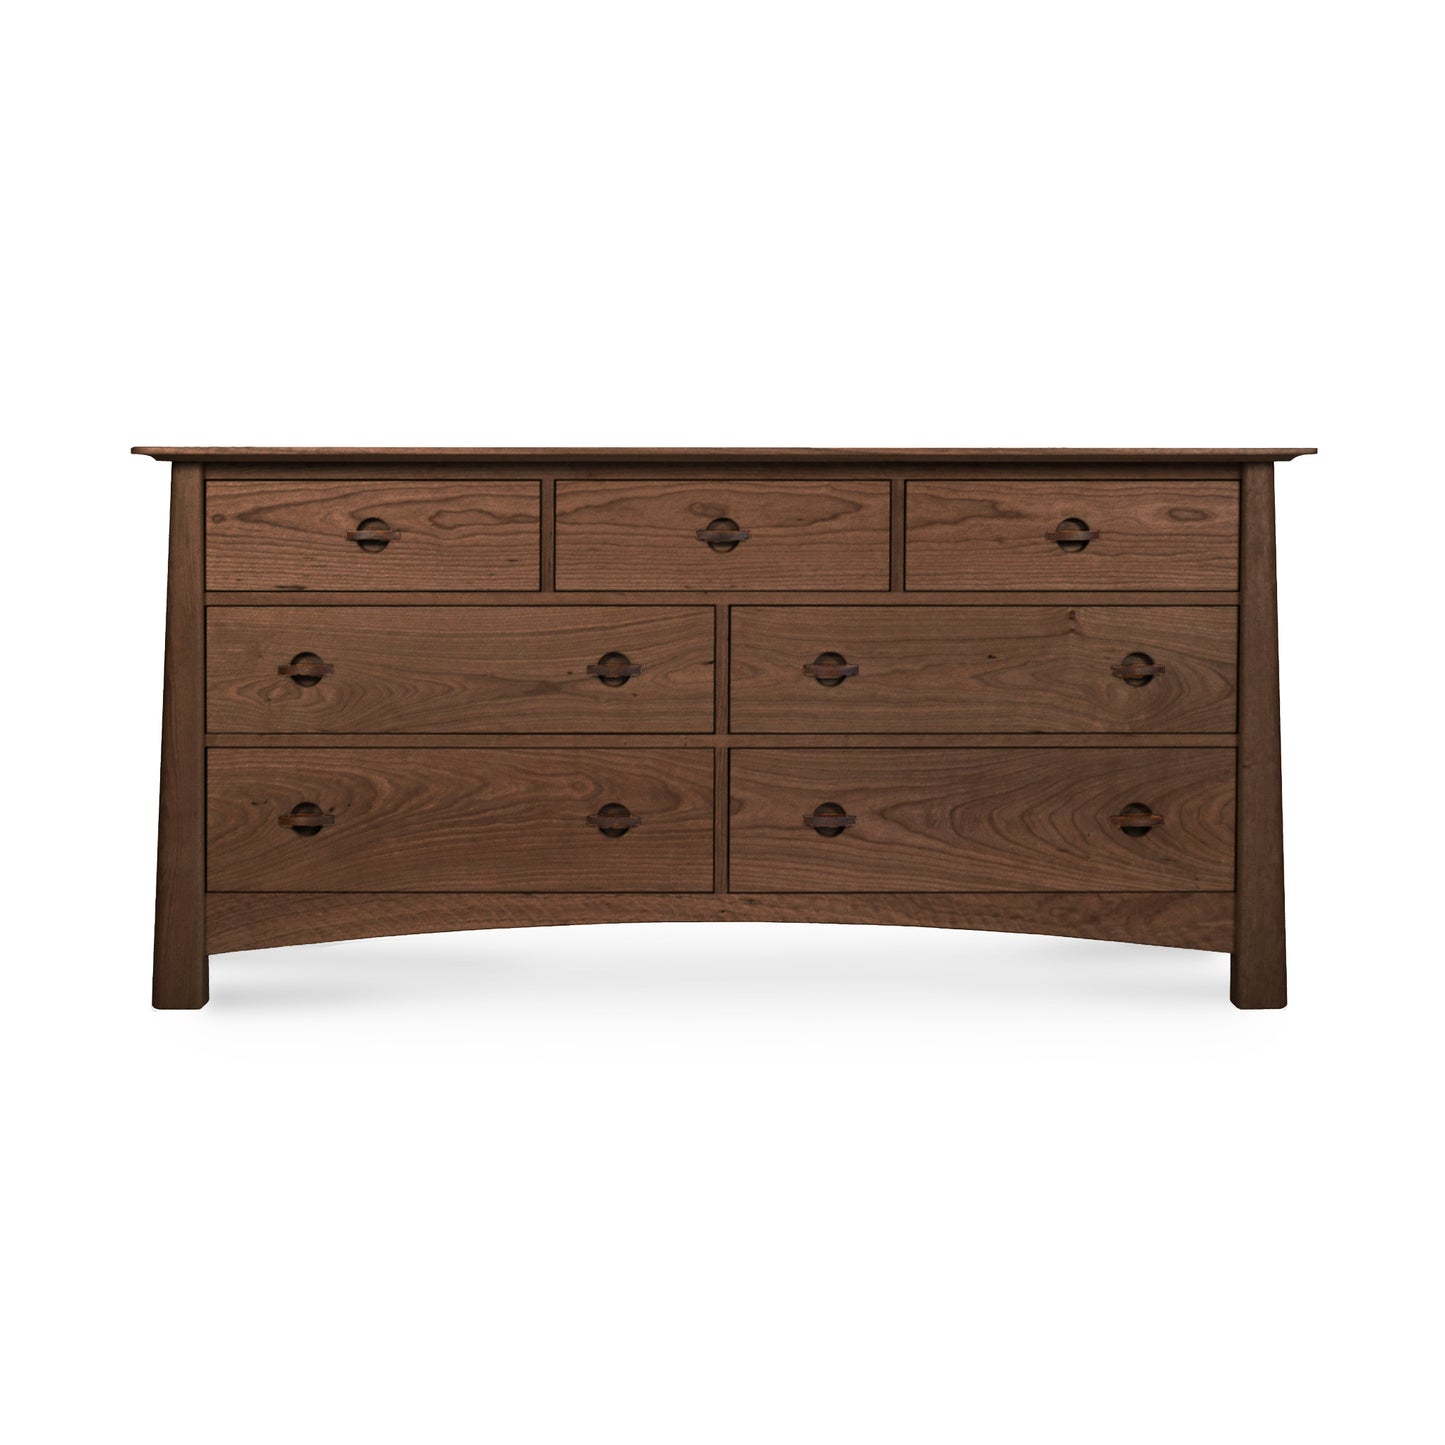 A handmade Cherry Moon 7-Drawer Dresser from the Maple Corner Woodworks Collection, featuring three smaller drawers at the top and six larger ones below, all with round knobs, crafted from sustainably harvested wood, against a plain white background.